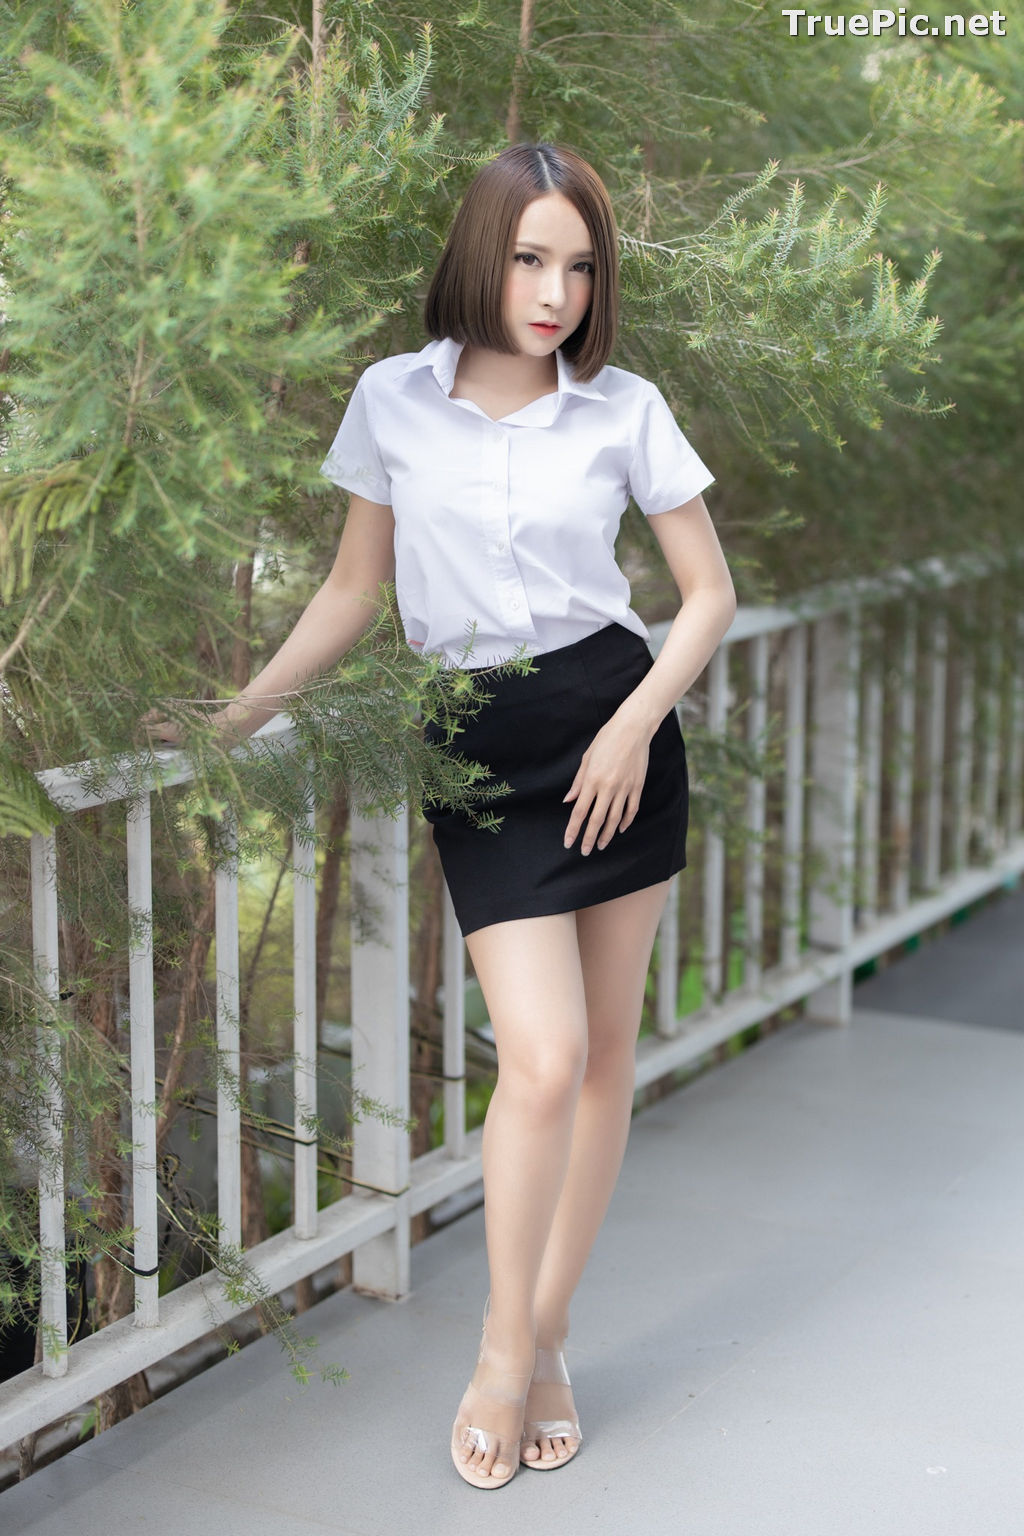 Image Thailand Sexy Model - ธนพร อ้นเซ่ง - How Do You Feel About Me - TruePic.net - Picture-48